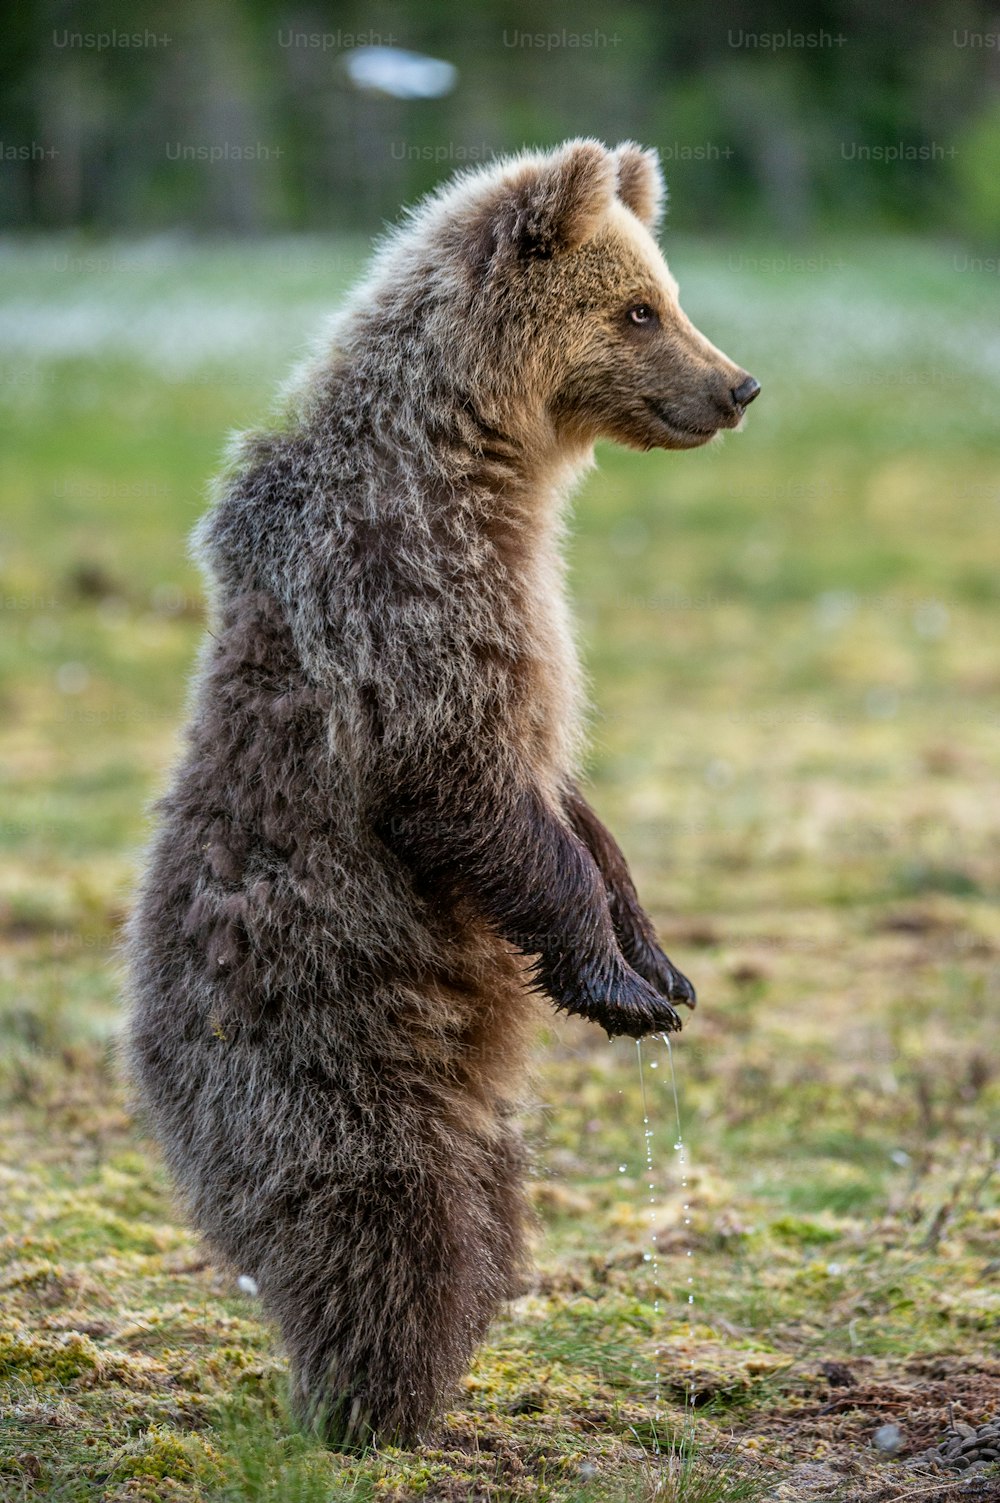 Bear cub on the swamp in the spring forest,. Bear Cub stands on its hind legs.  Bear family of Brown Bears. Scientific name: Ursus arctos.